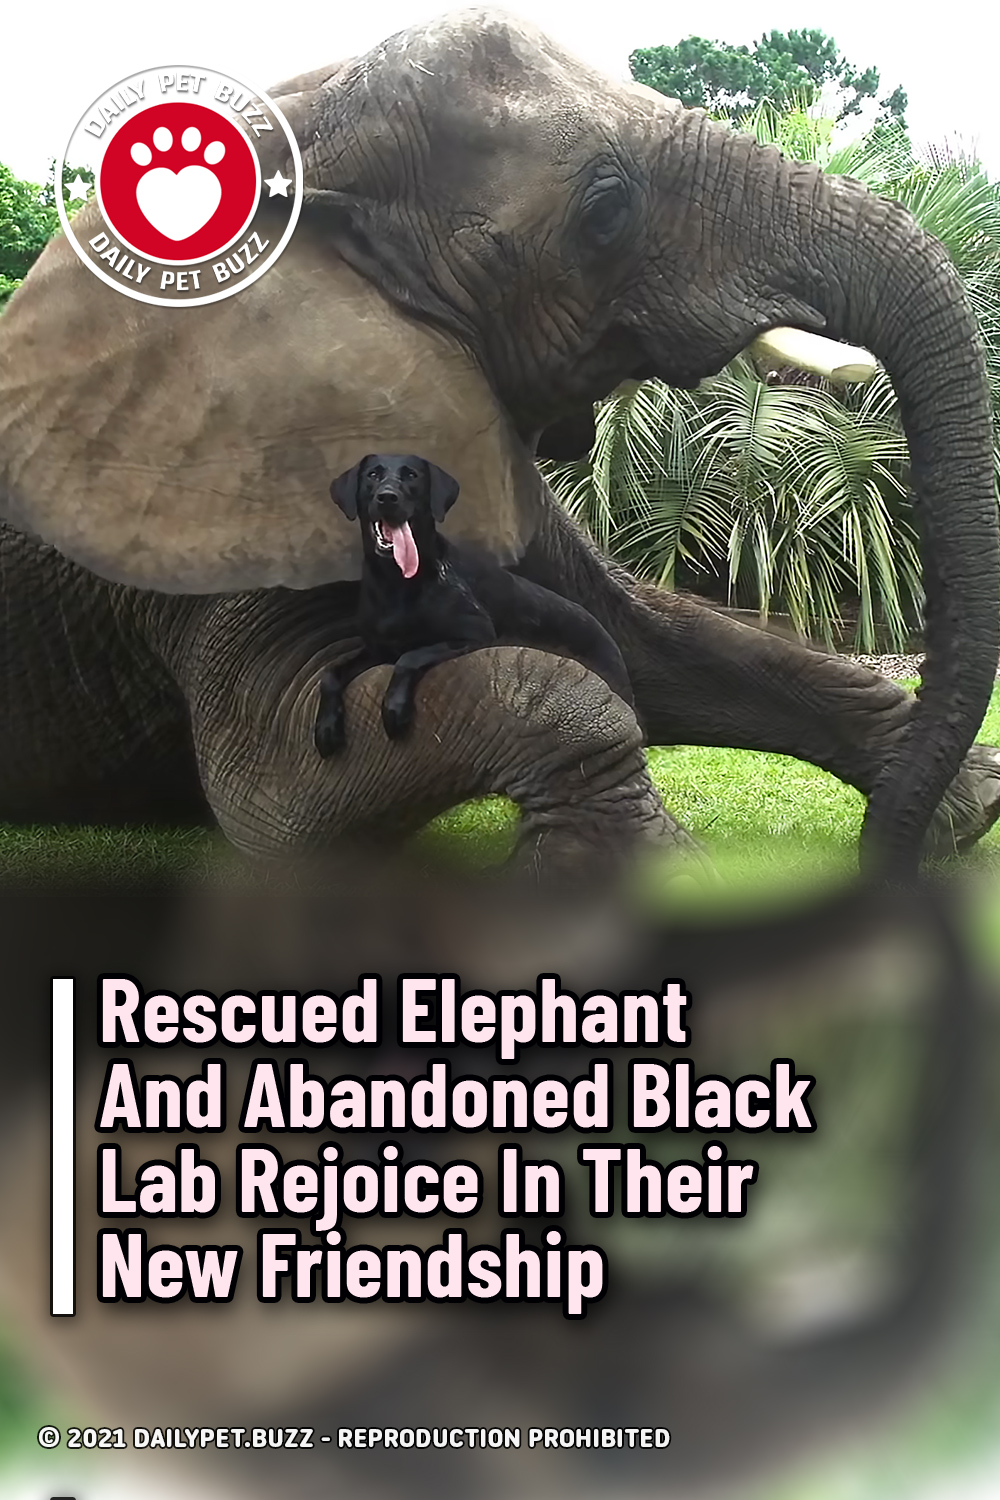 Rescued Elephant And Abandoned Black Lab Rejoice In Their New Friendship